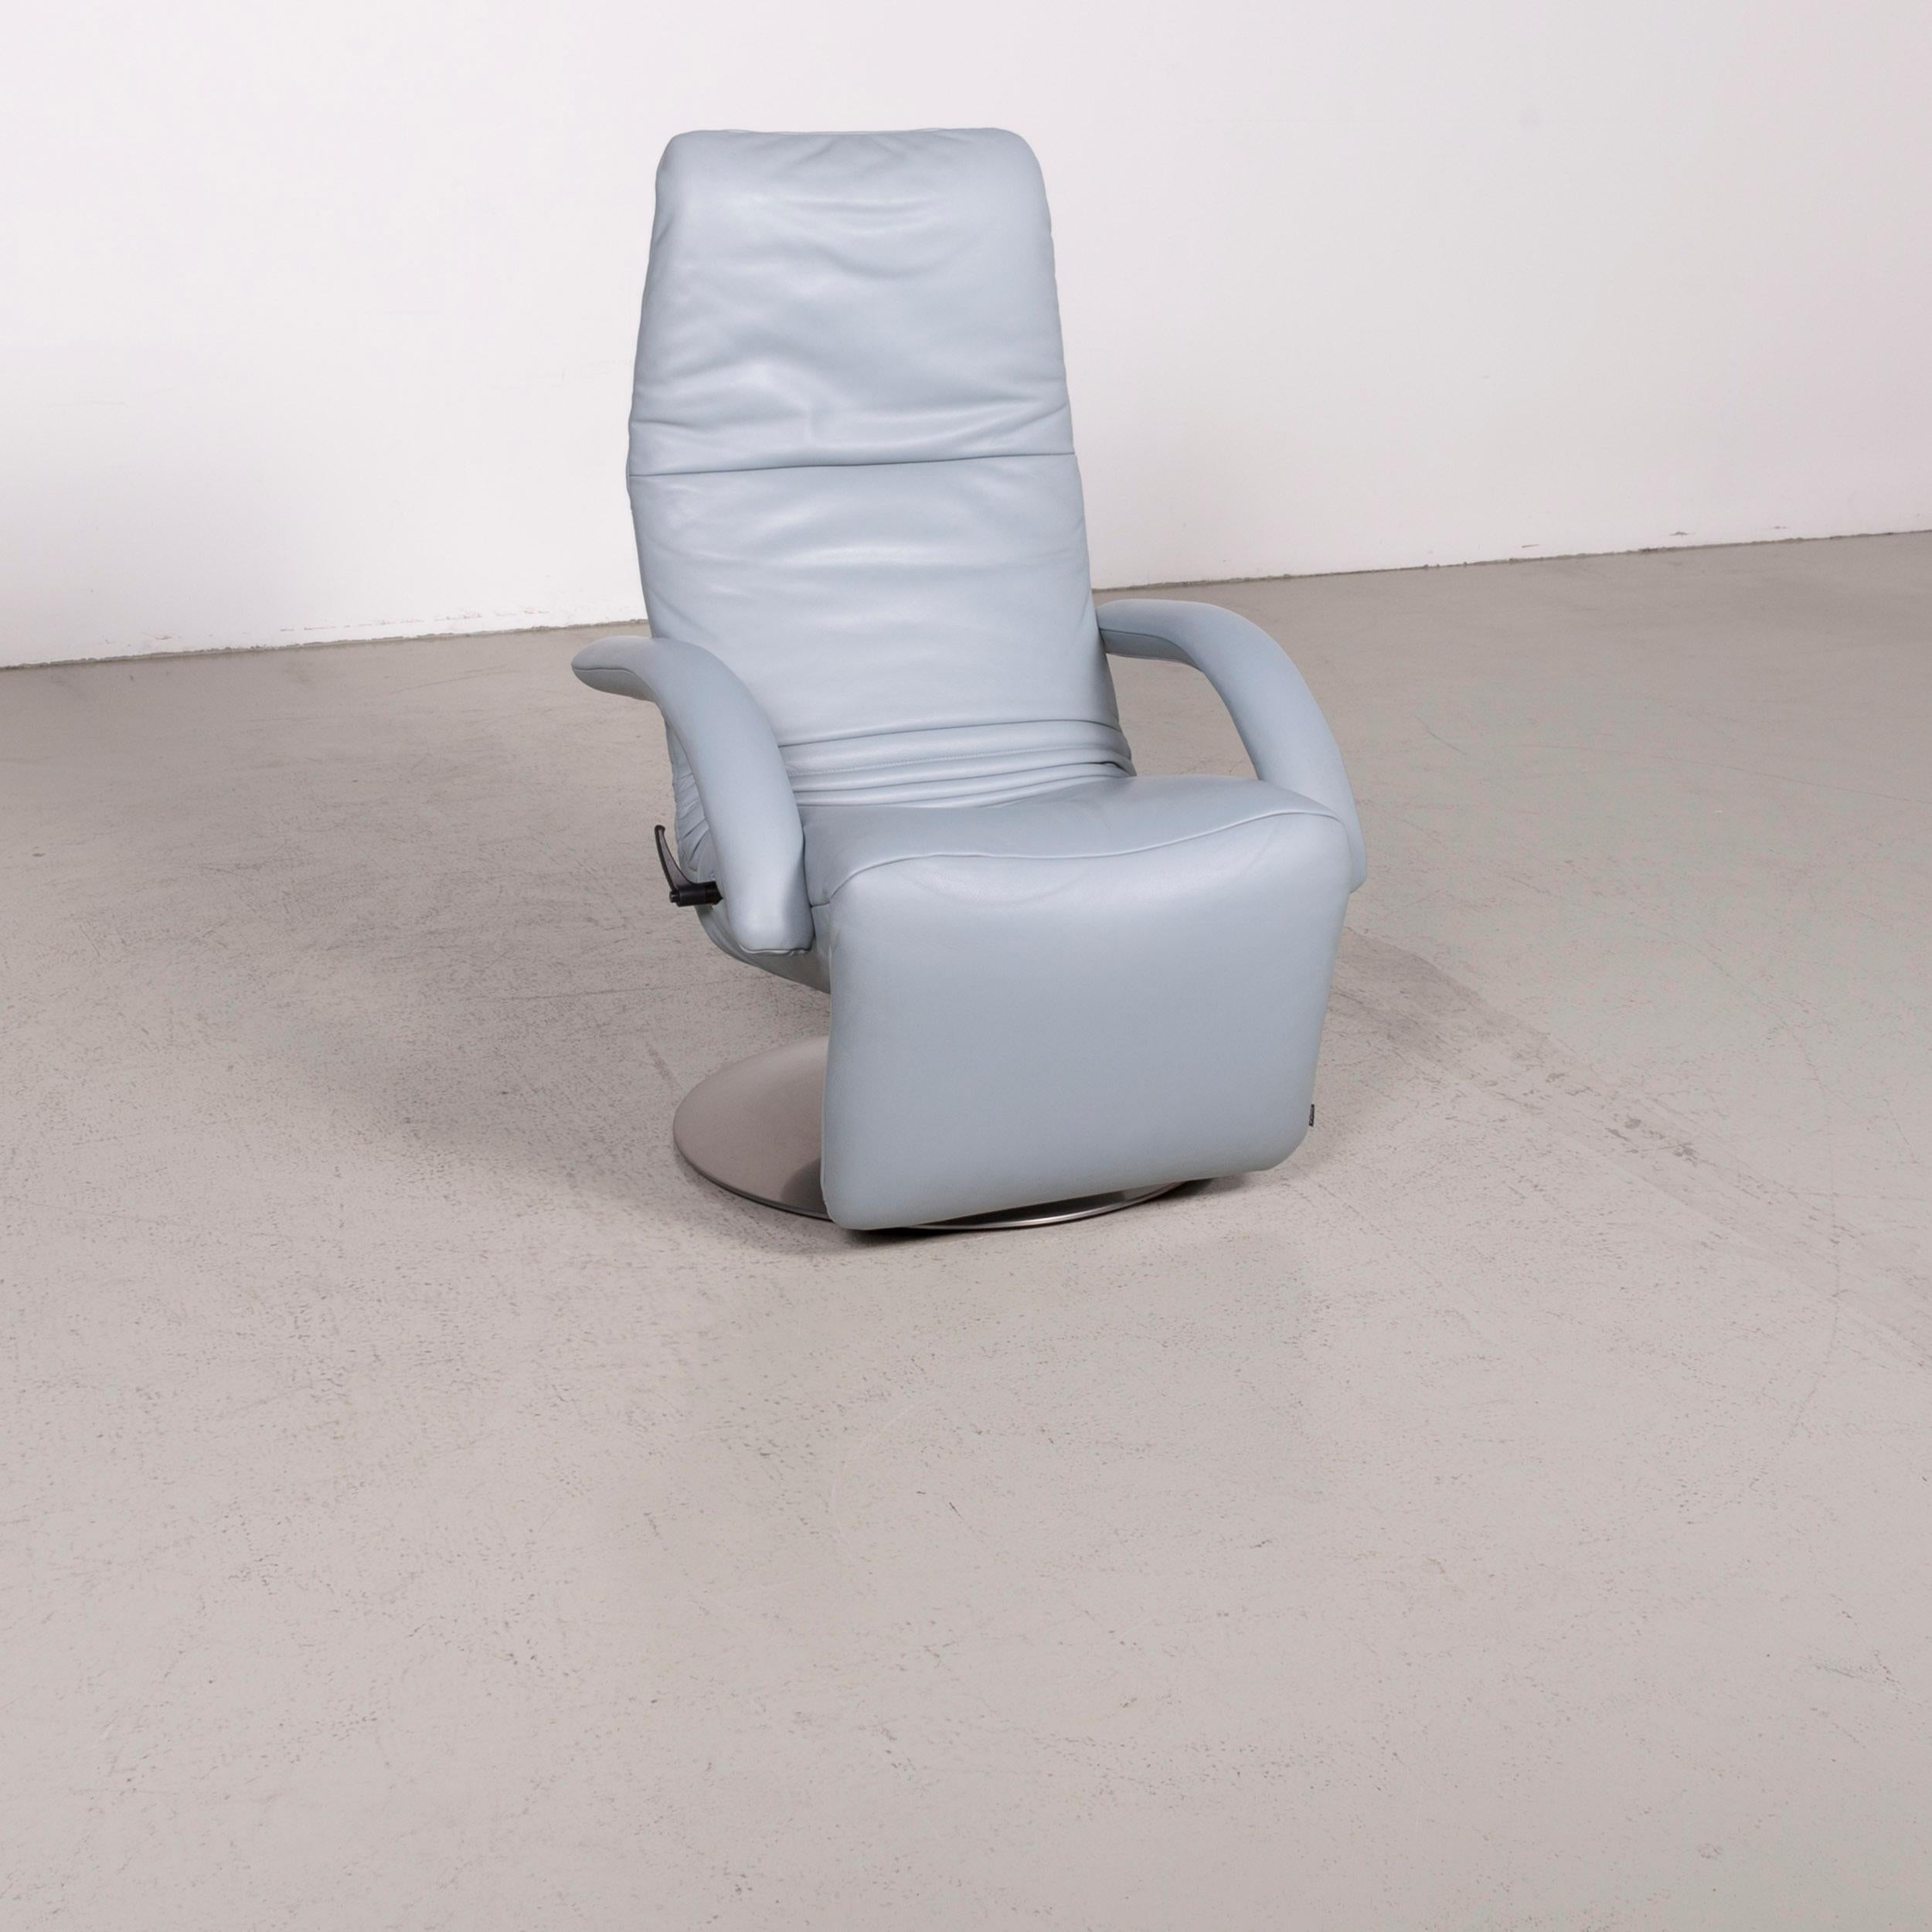 We bring to you a JORI Yoga designer leather armchair blue genuine leather chair relax.

Product measurements in centimeters:

Depth 90
Width 75
Height 80
Seat-height 45
Rest-height 55
Seat-depth 45
Seat-width 50
Back-height 80.
  